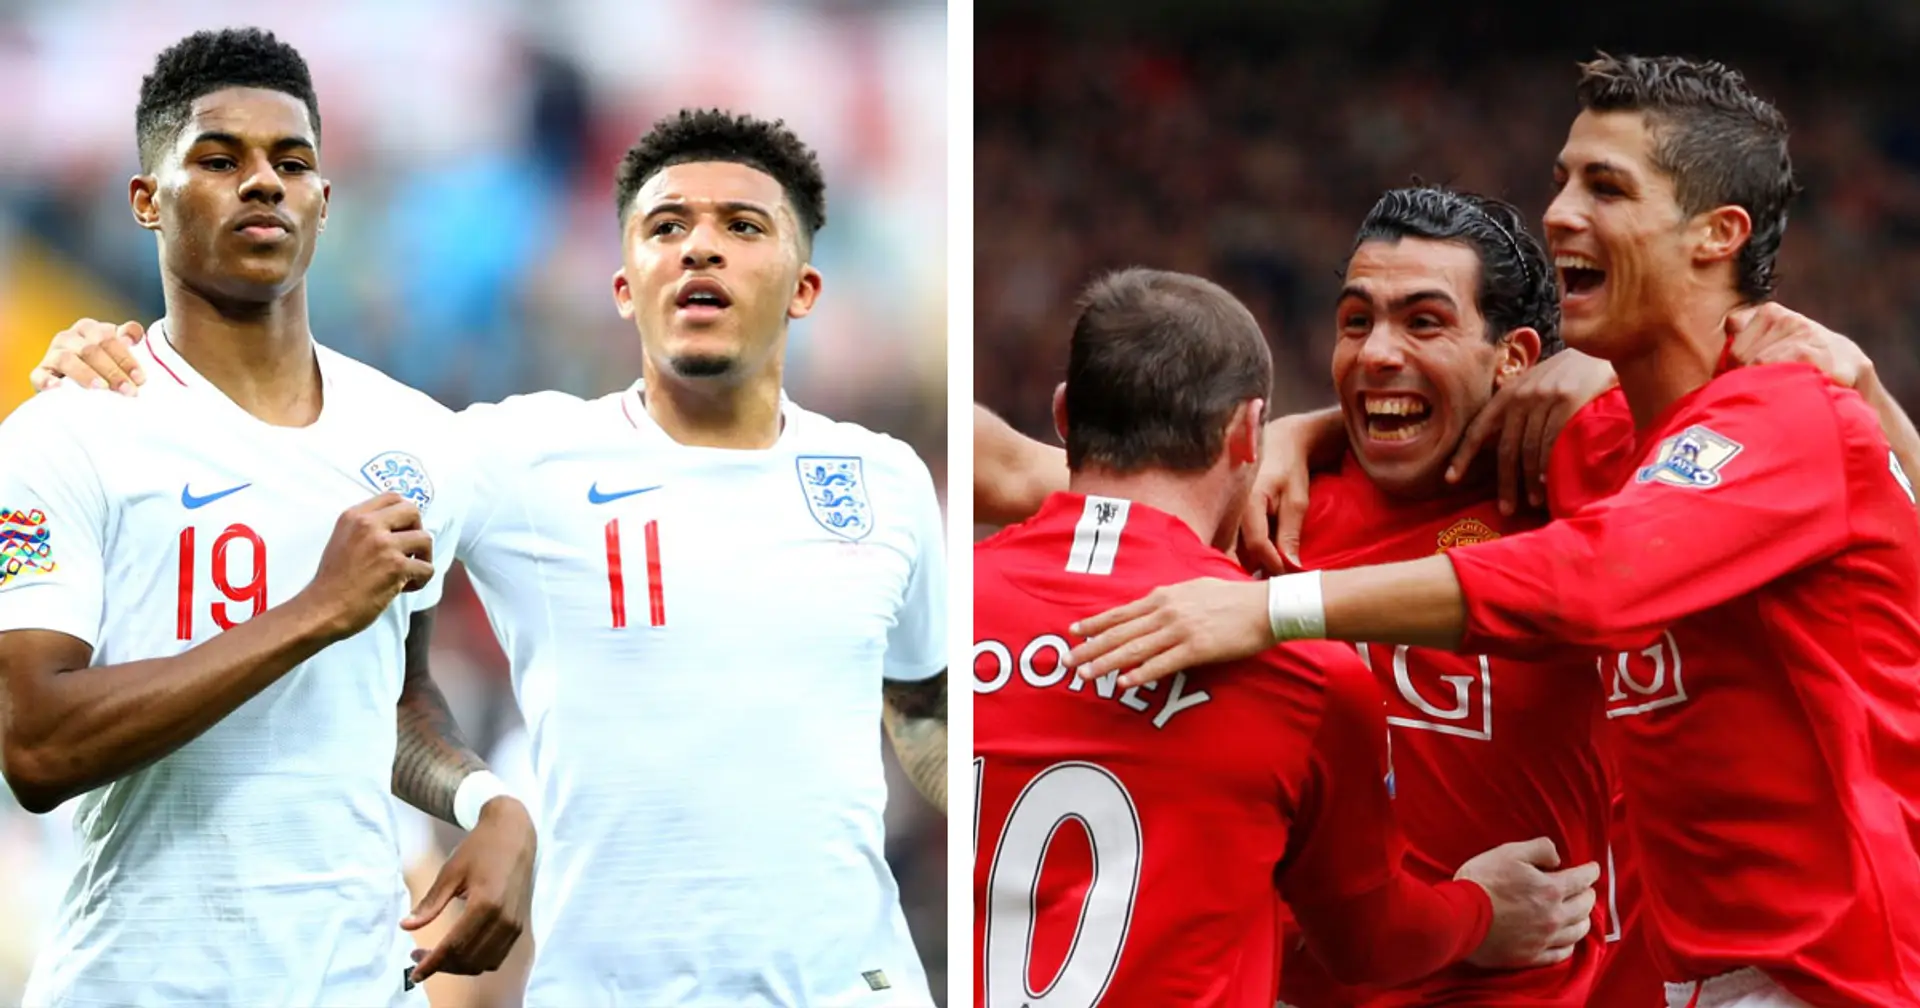 'The current front-three doesn't have the same hunger': United fans compare current attacking trio with Rooney-Ronaldo-Tevez